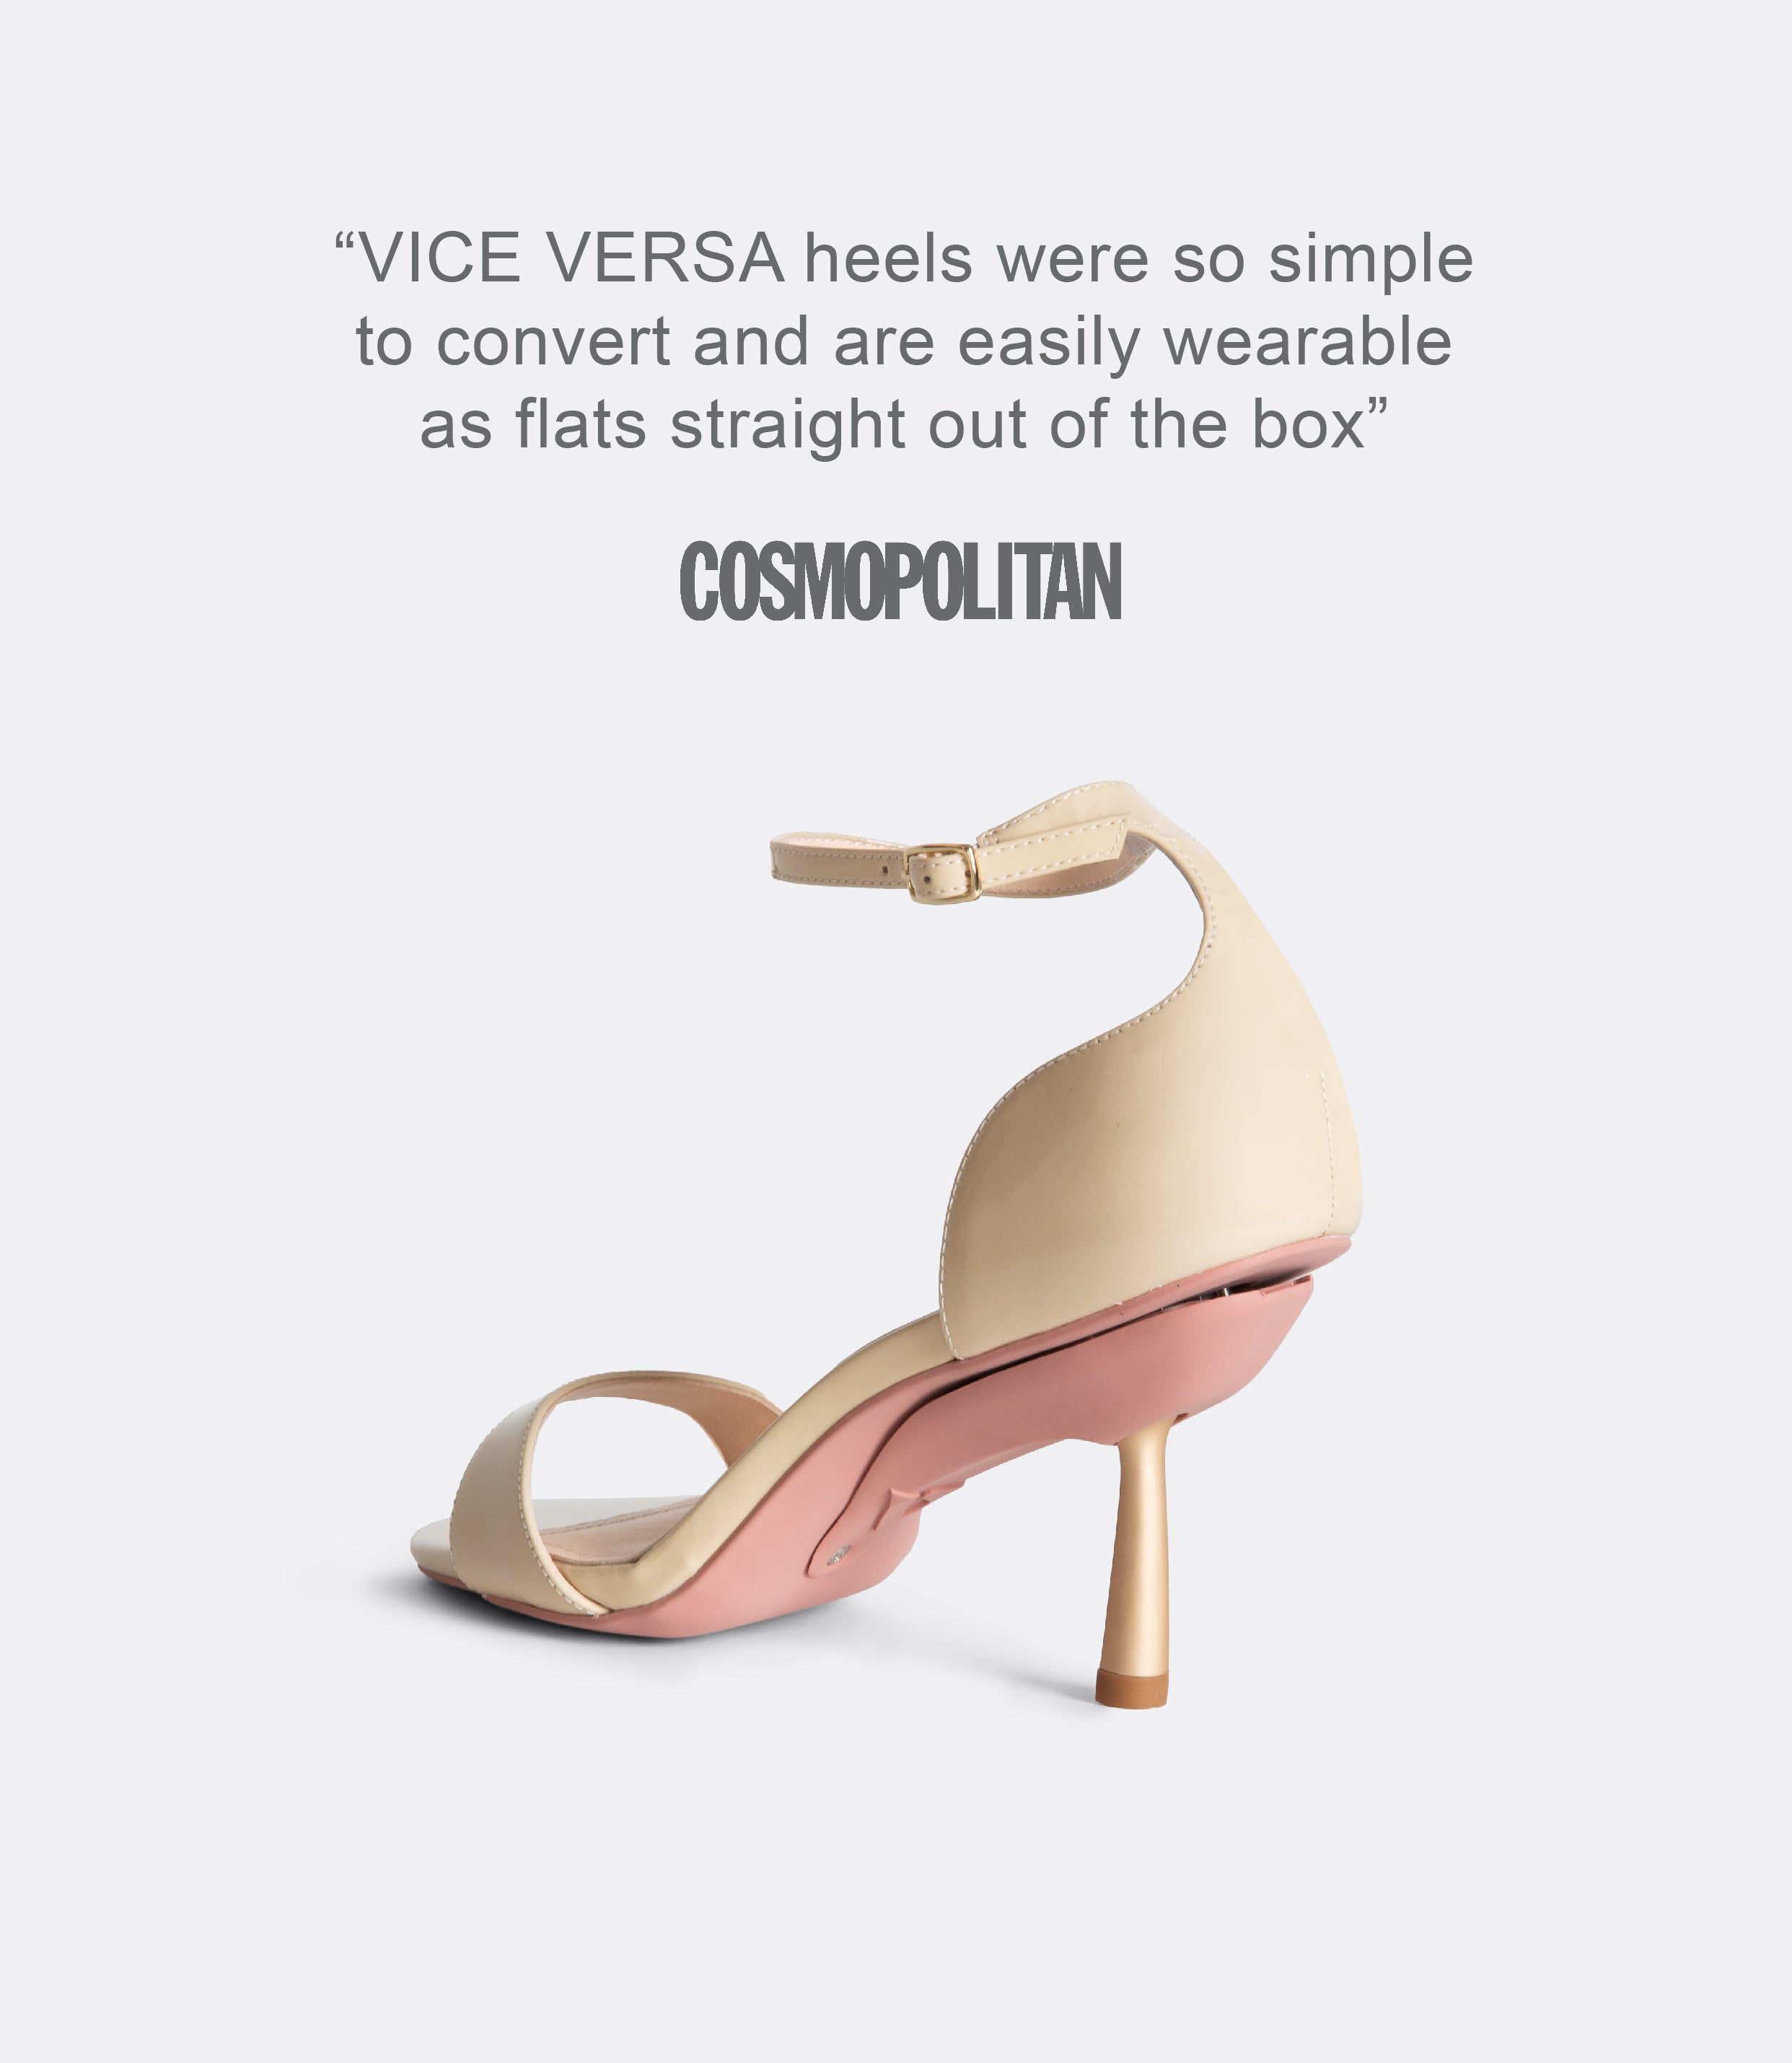 A quote from Cosmopolitan and a back view of the beige editor sandal.